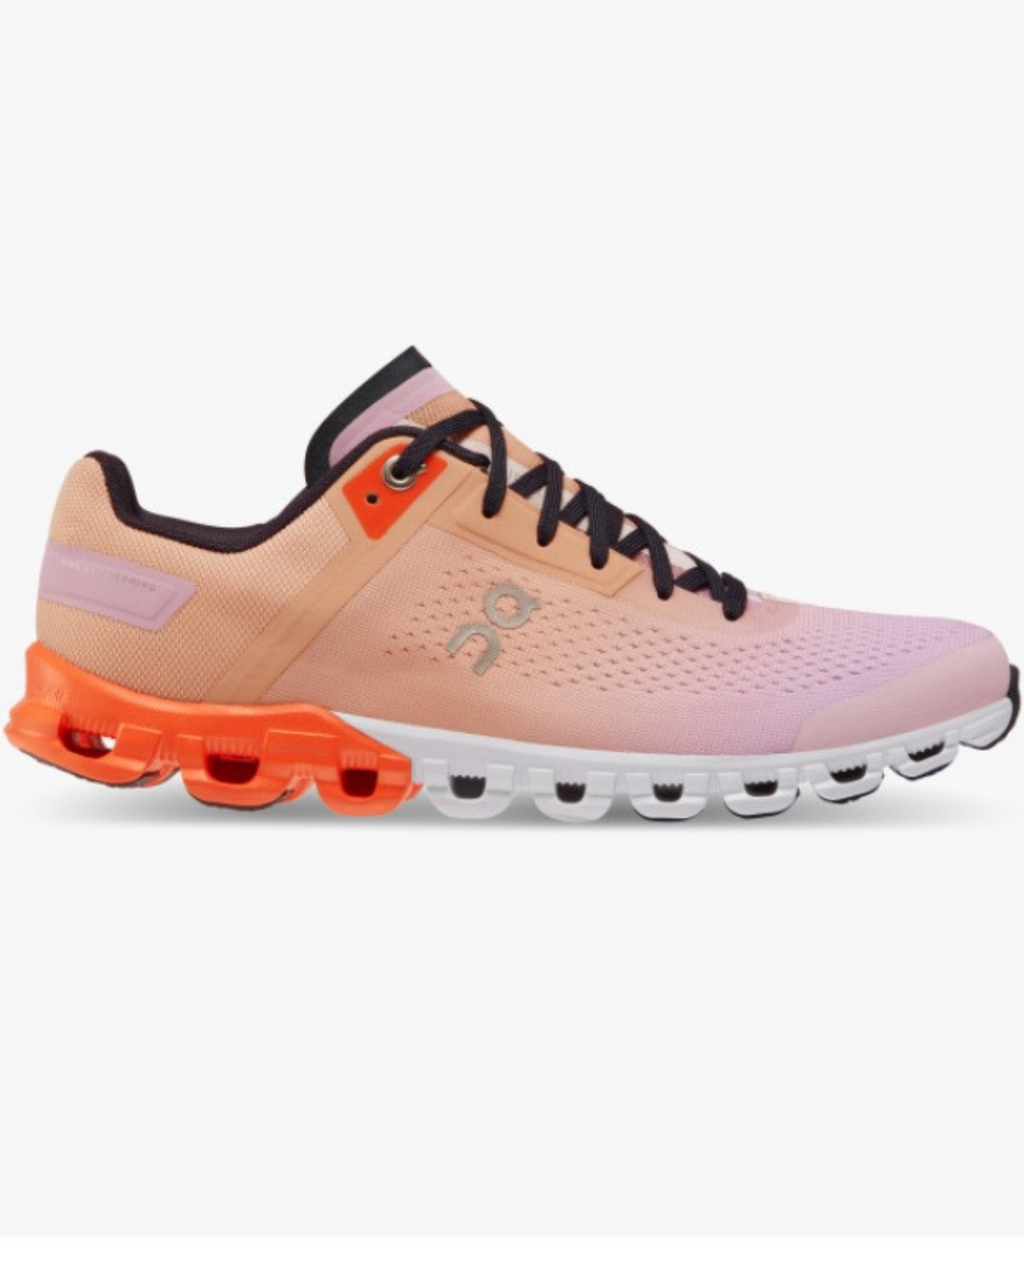 Cloudflow Sneakers - Island Outfitters